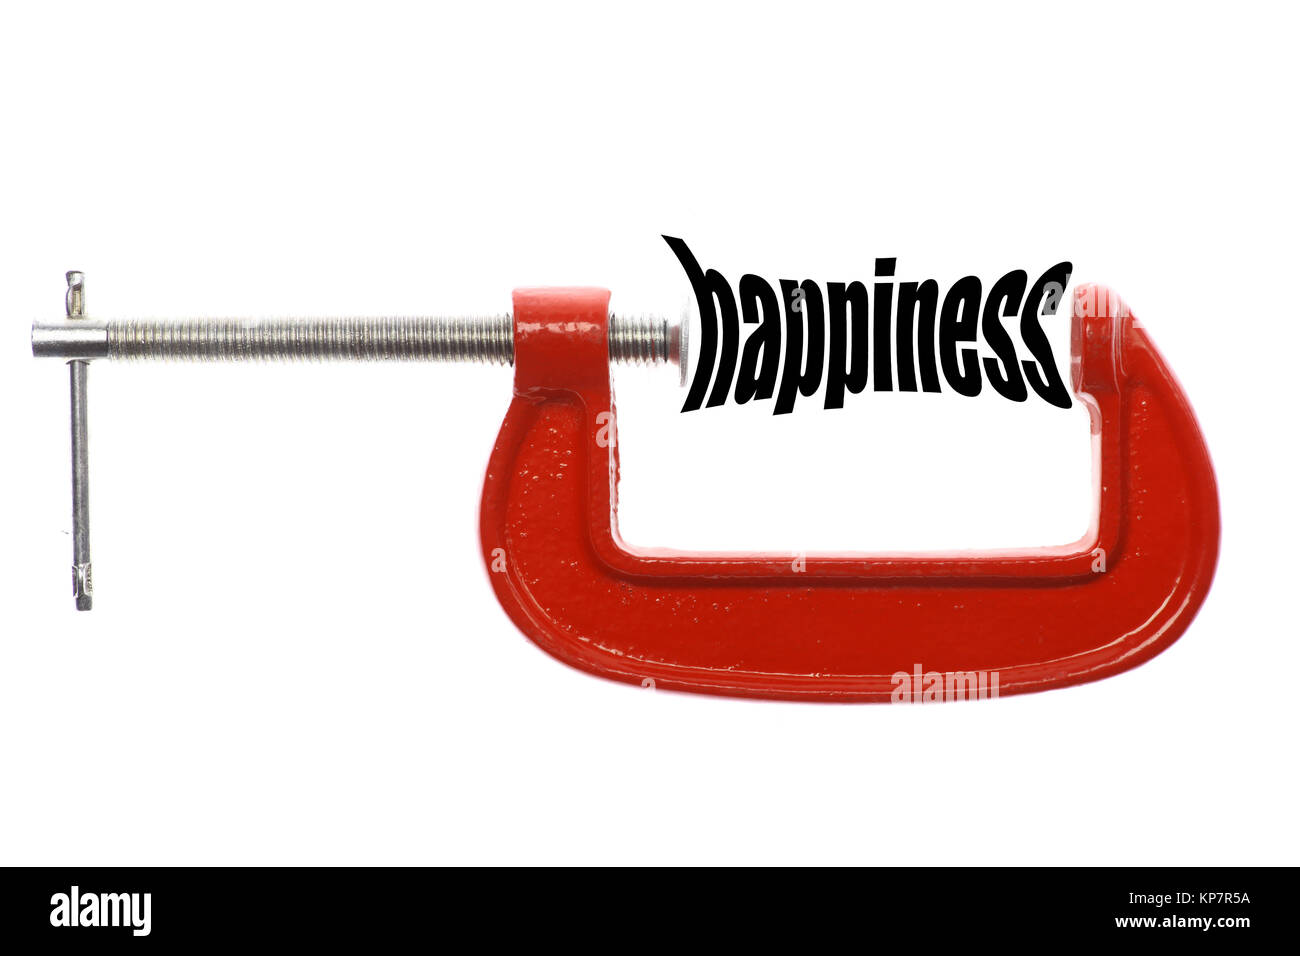 Compressed hapiness concept Stock Photo